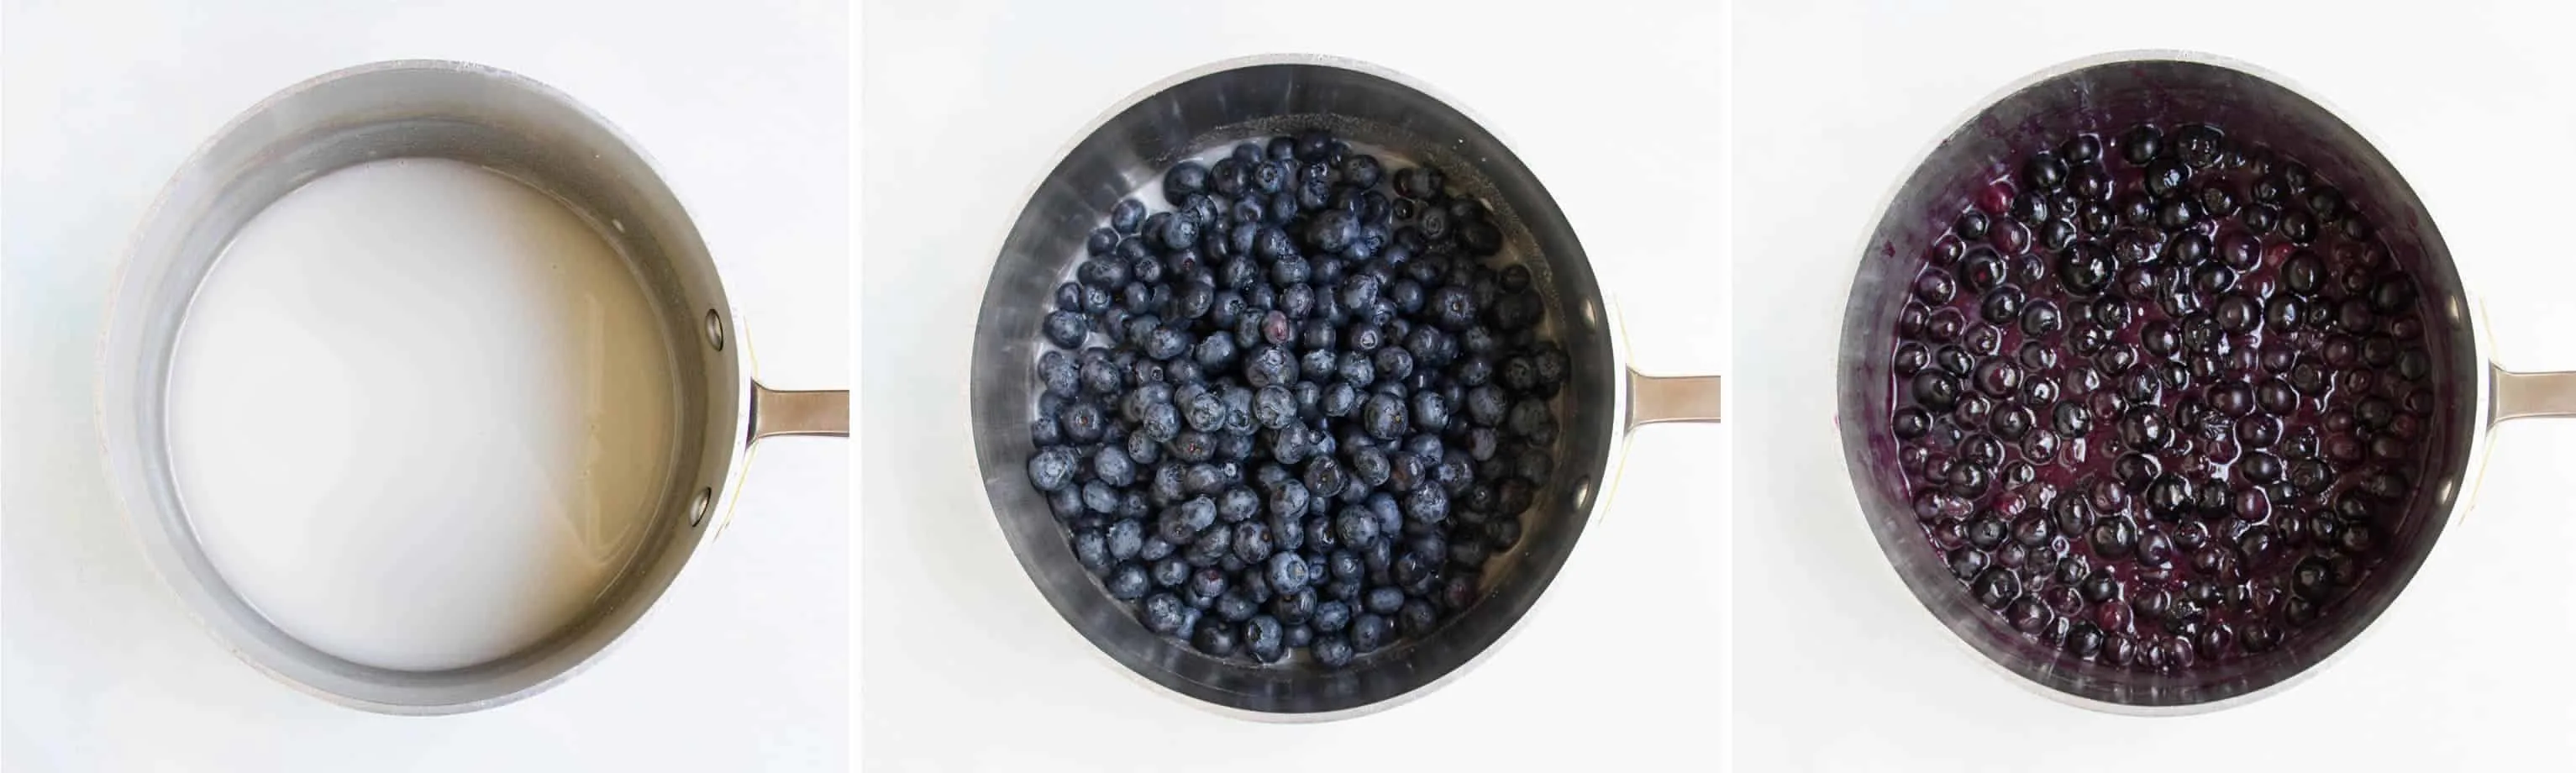 Fresh Blueberry Pie Filling. Make the most delicious, fresh tasting pie filling on your stove top! Fill a pre-baked pie crust or top your favorite dessert.